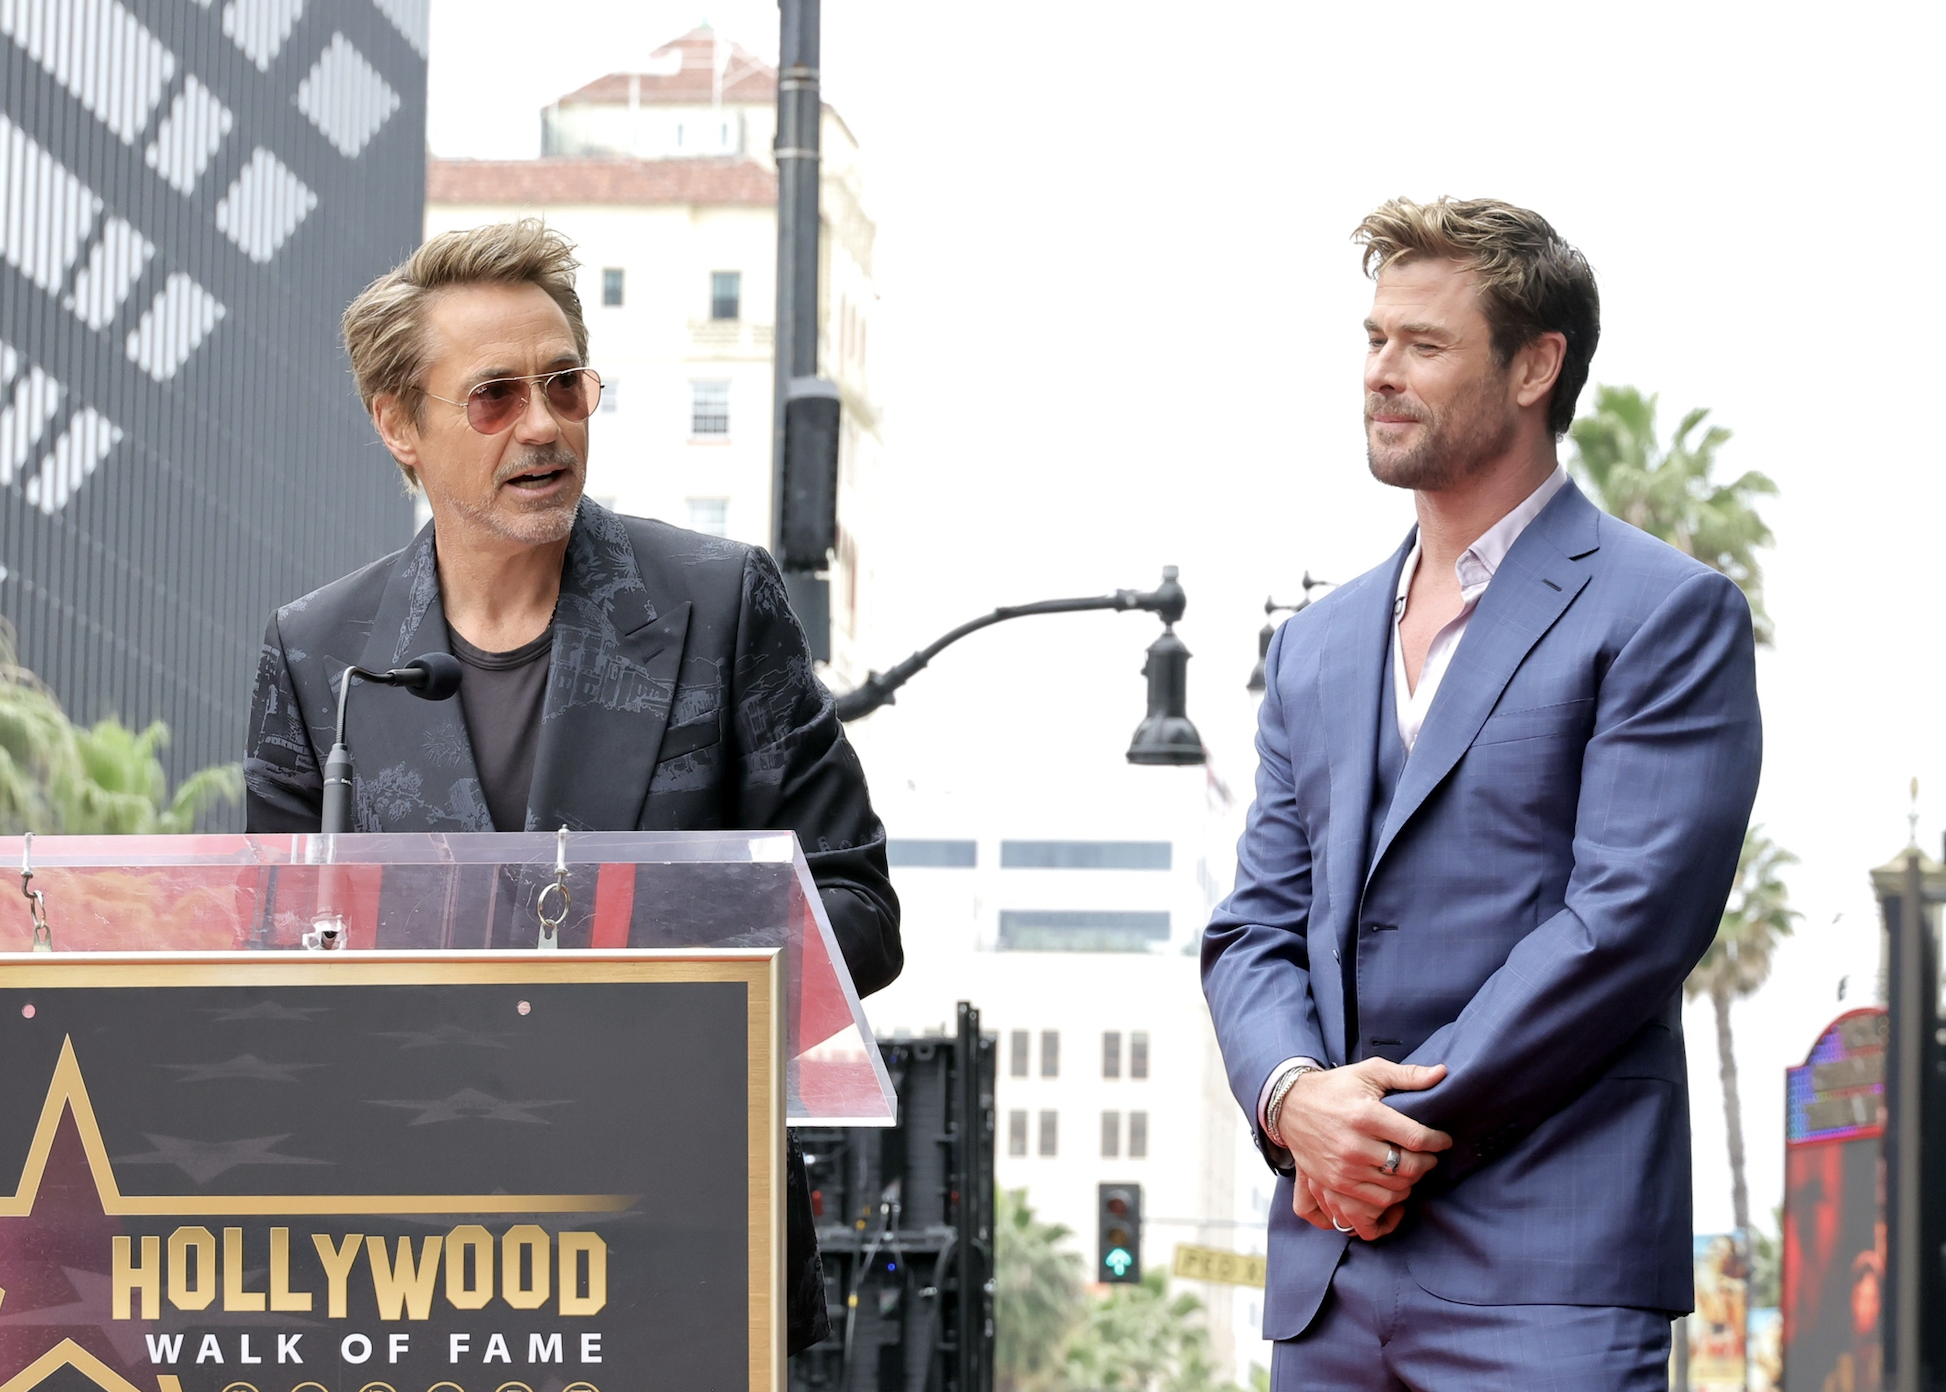 Robert Downey Jr. Roasts Chris Hemsworth by Asking ‘Avengers’ Cast to Describe ‘Thor’ Star in Three Words; Chris...